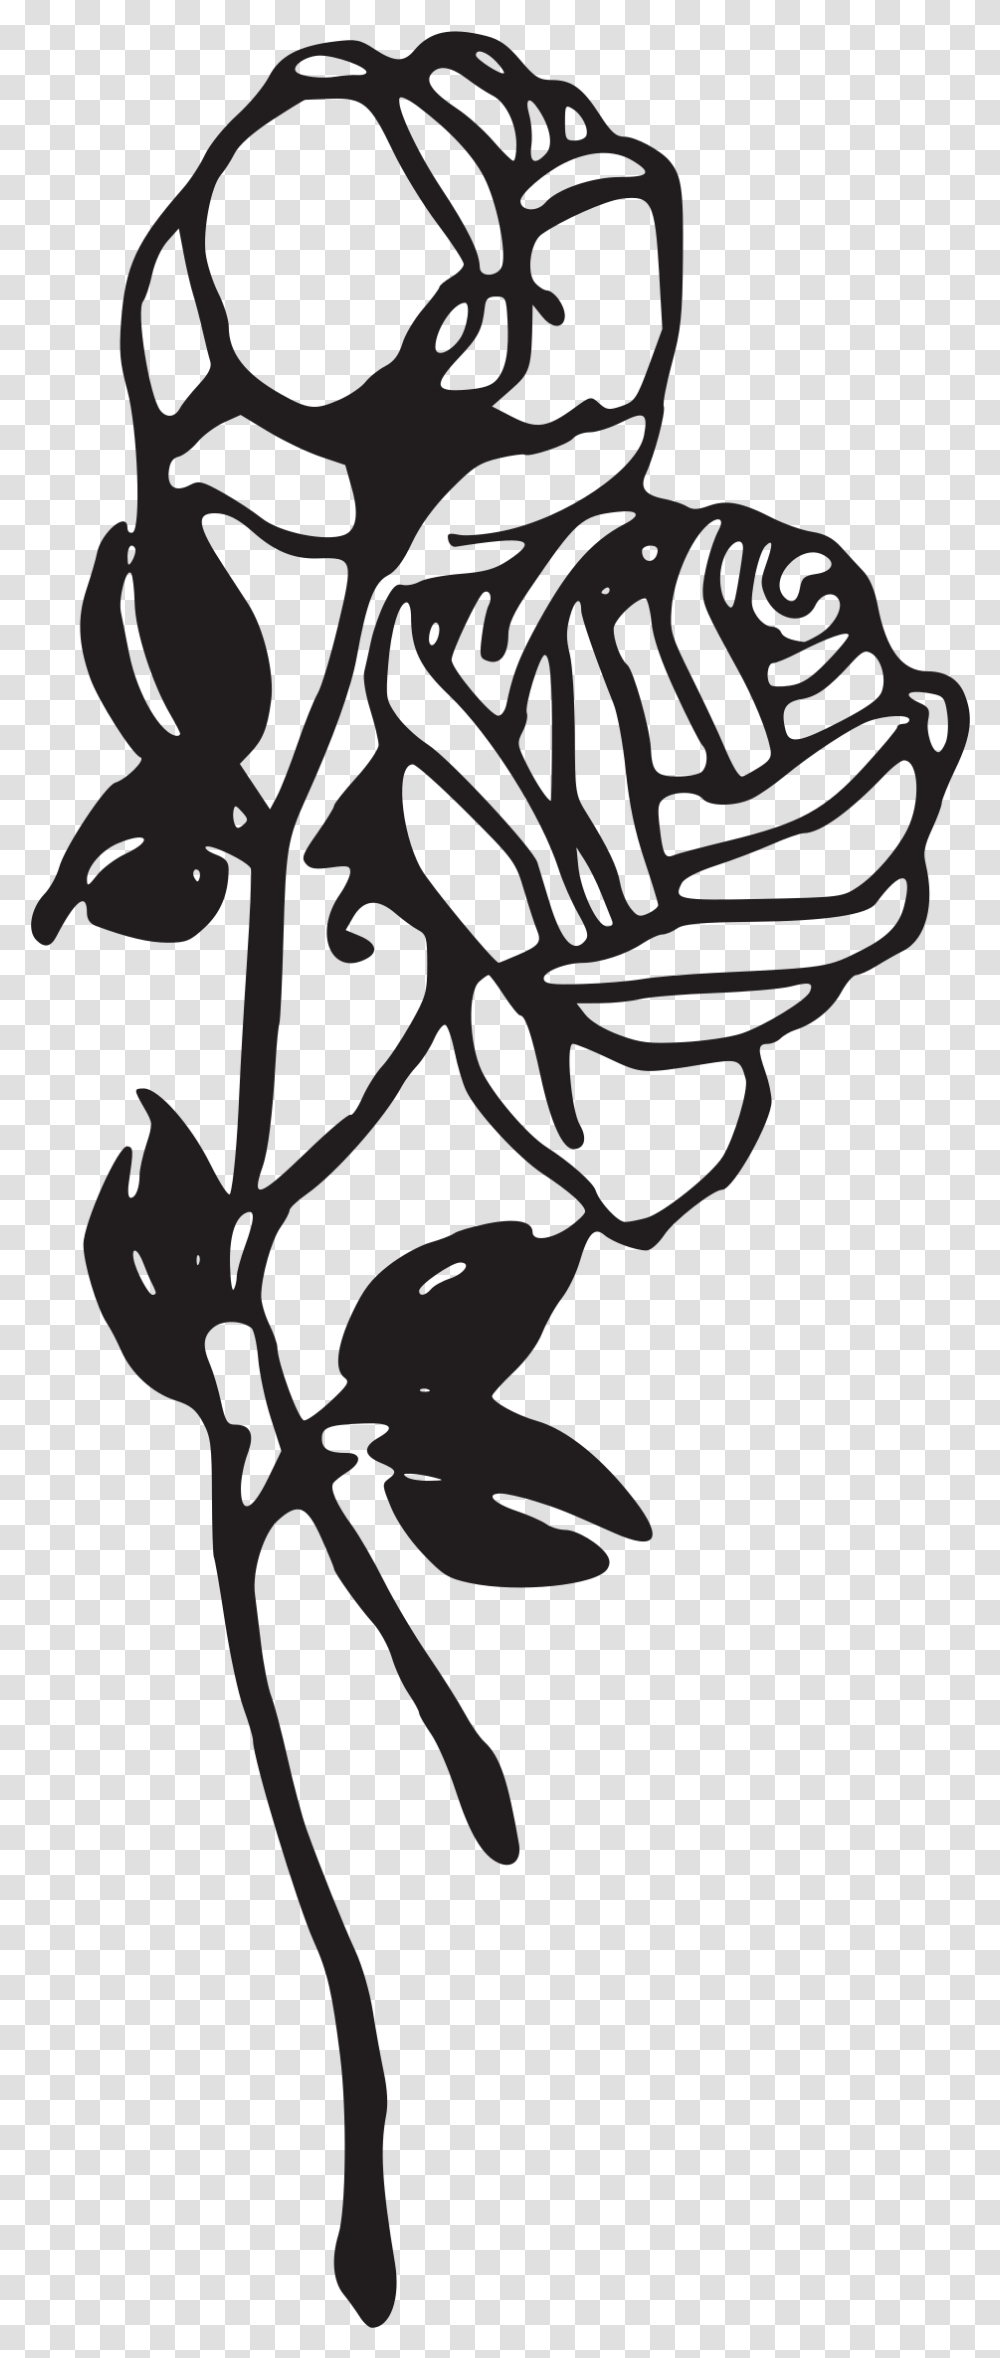 Two Roses Clip Arts Rose Clipart Black And White, Stencil, Plant, Tree Transparent Png